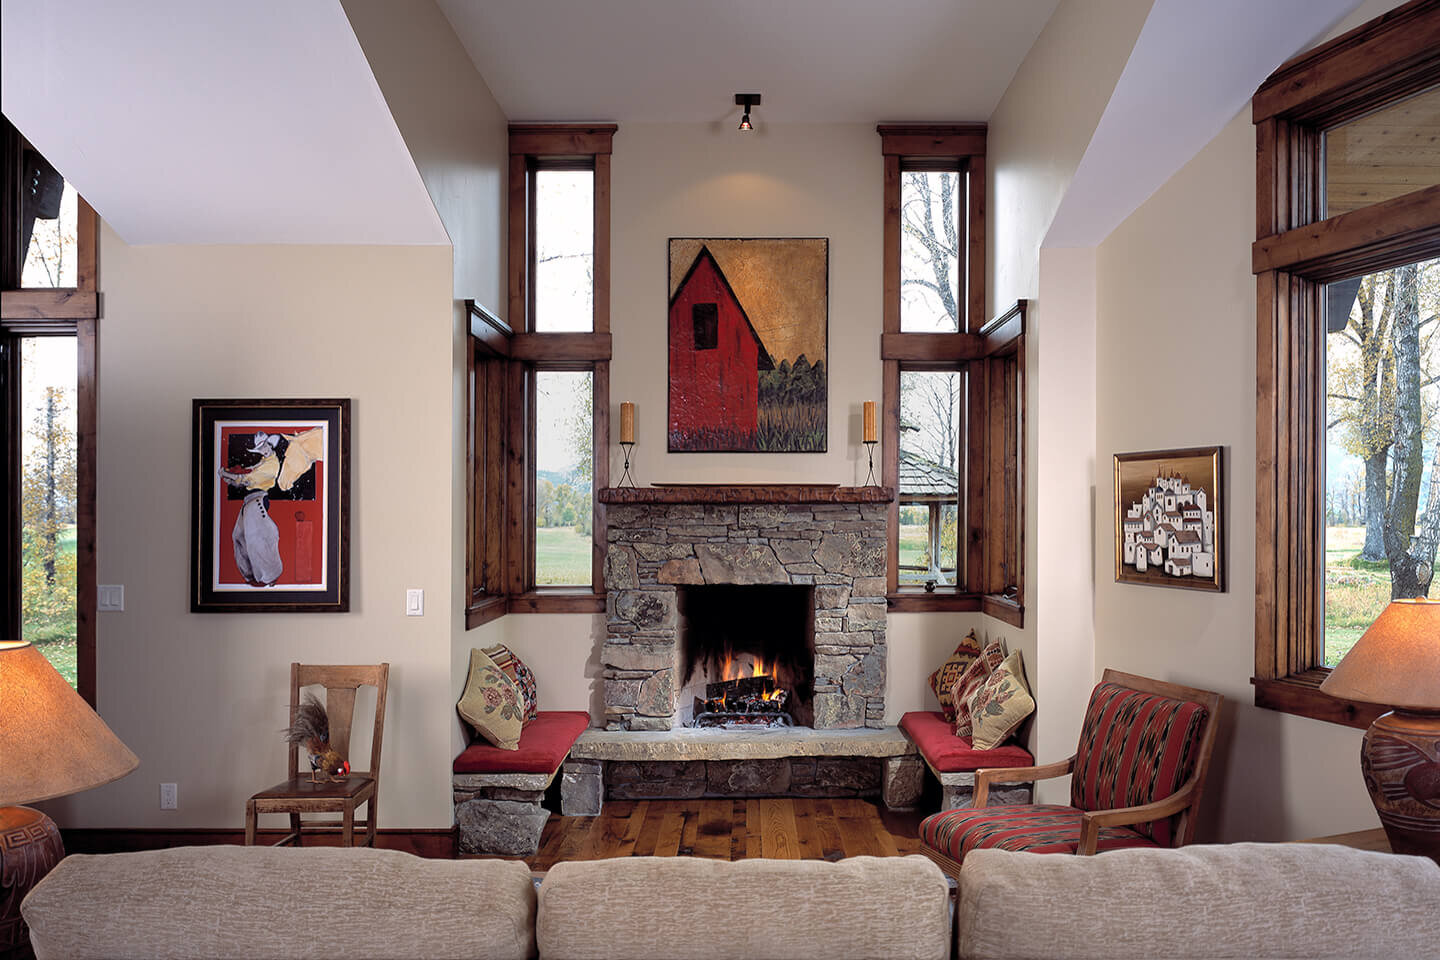 Living room with open hearth fireplace and artwork